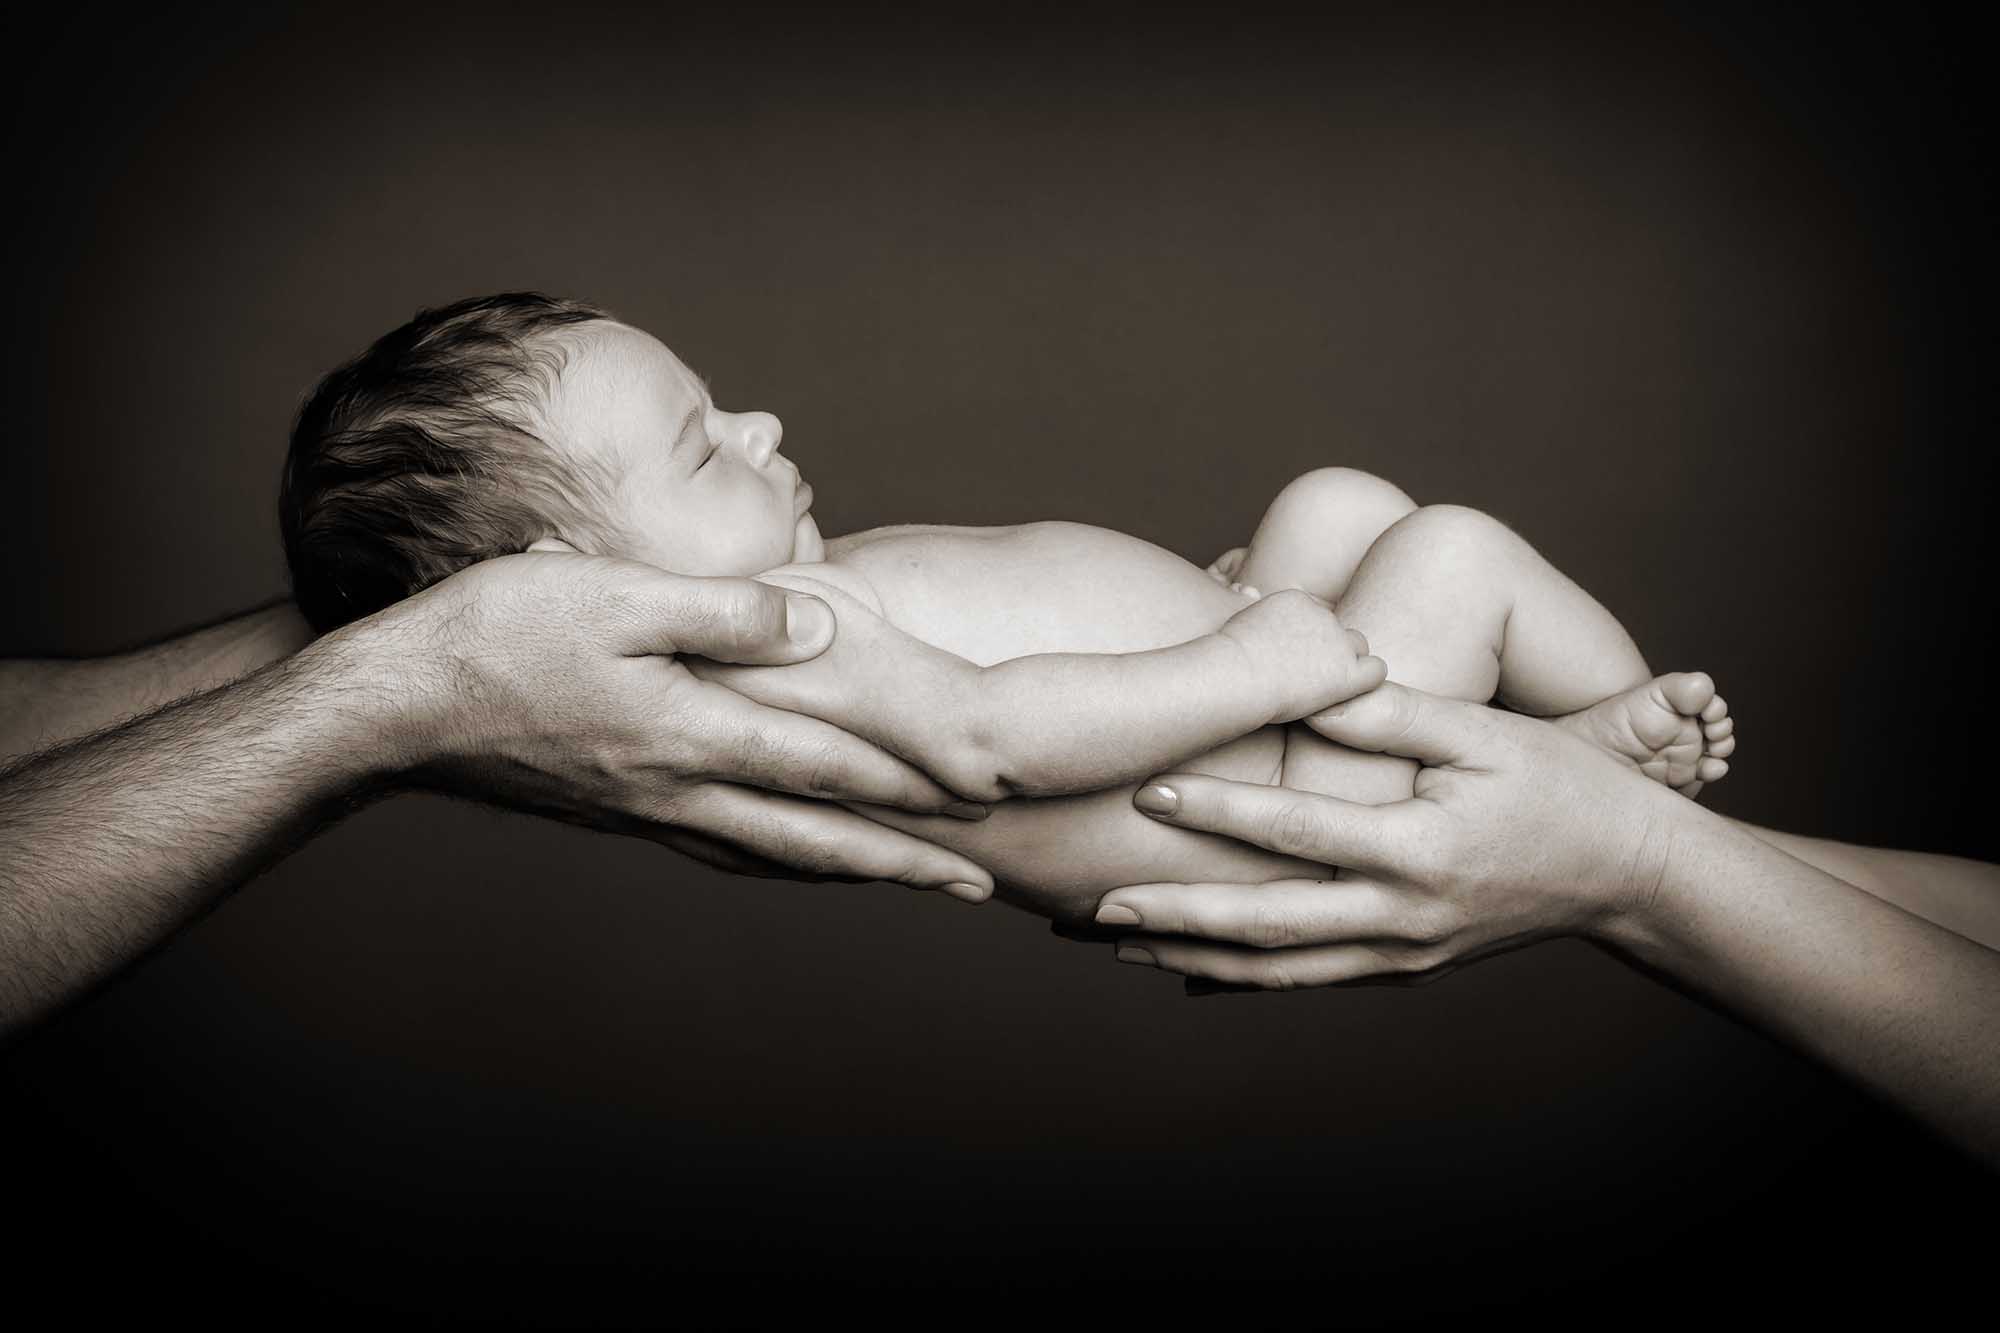 New baby in parents' hands by Eric Pearce Photography